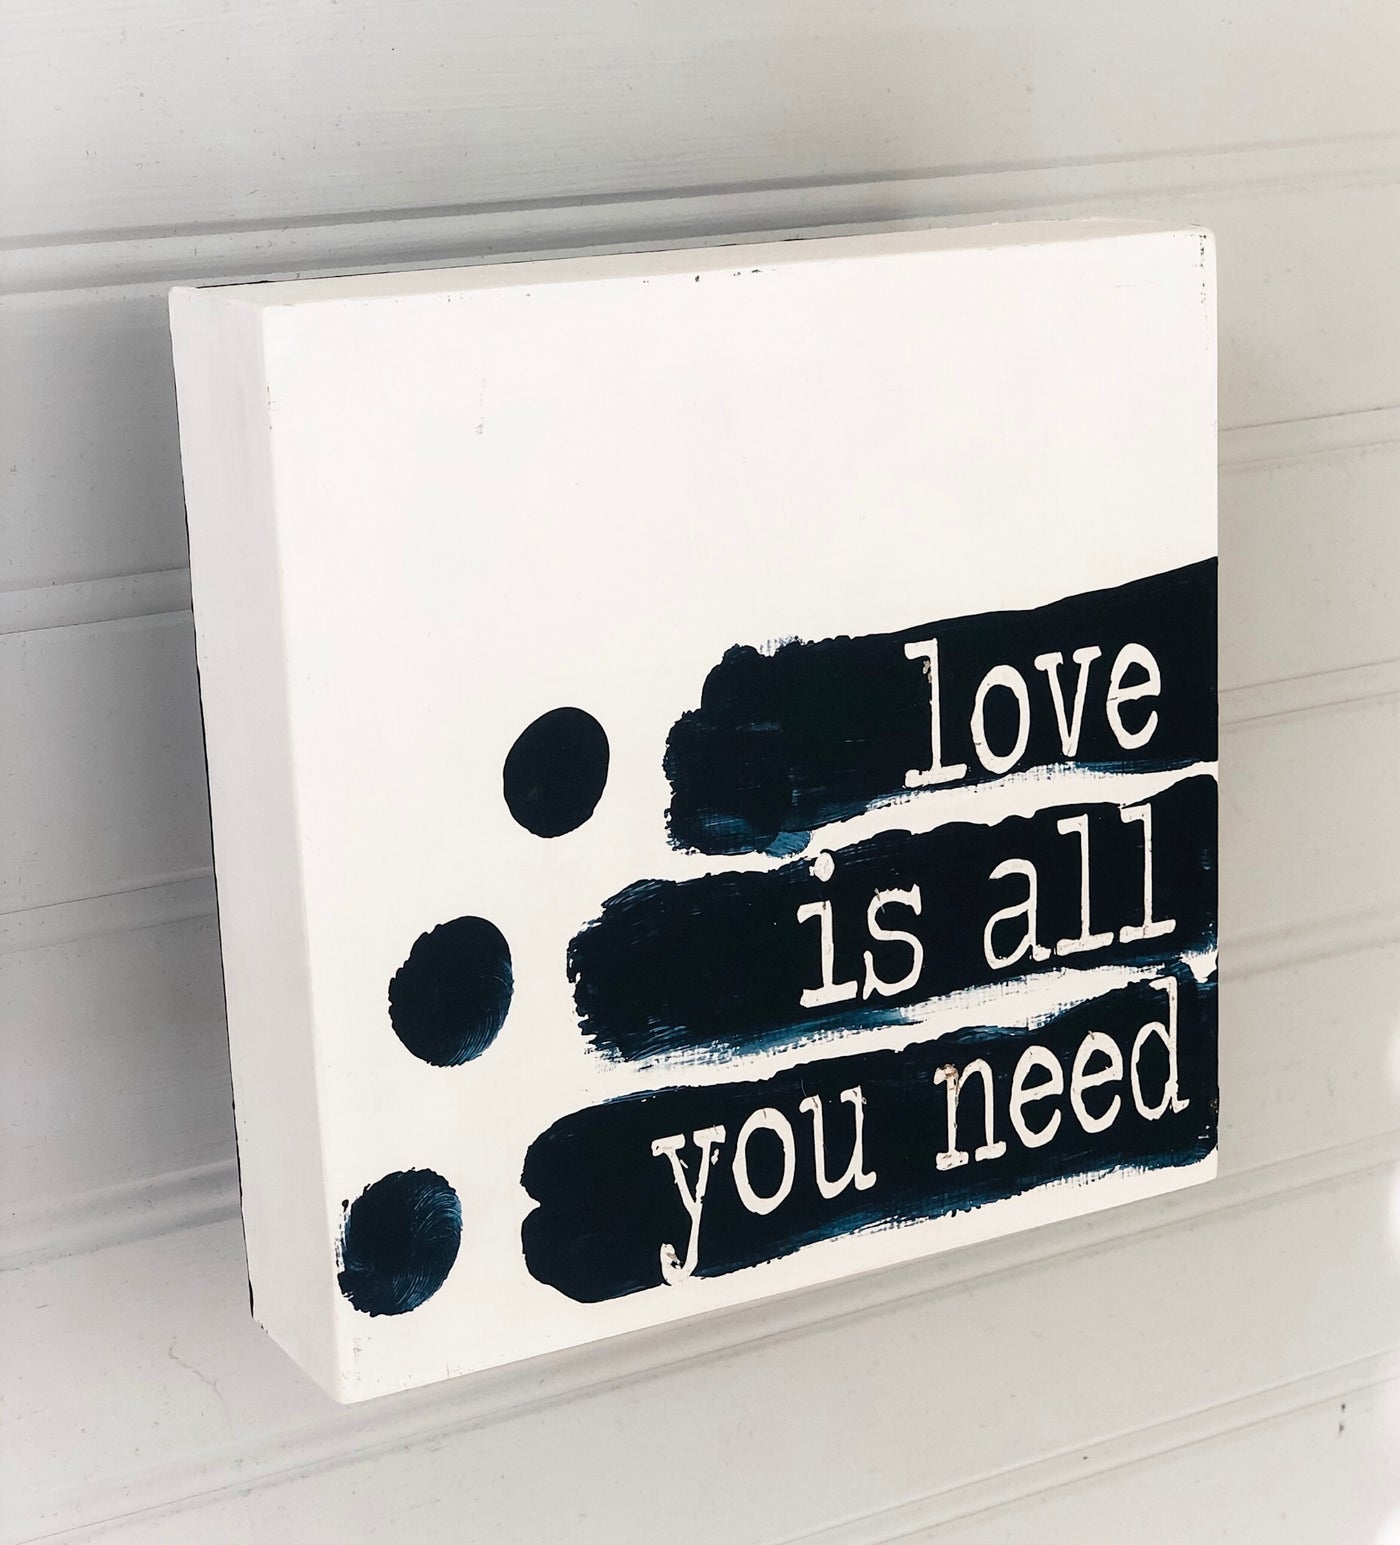 love is all you need - wood panel art